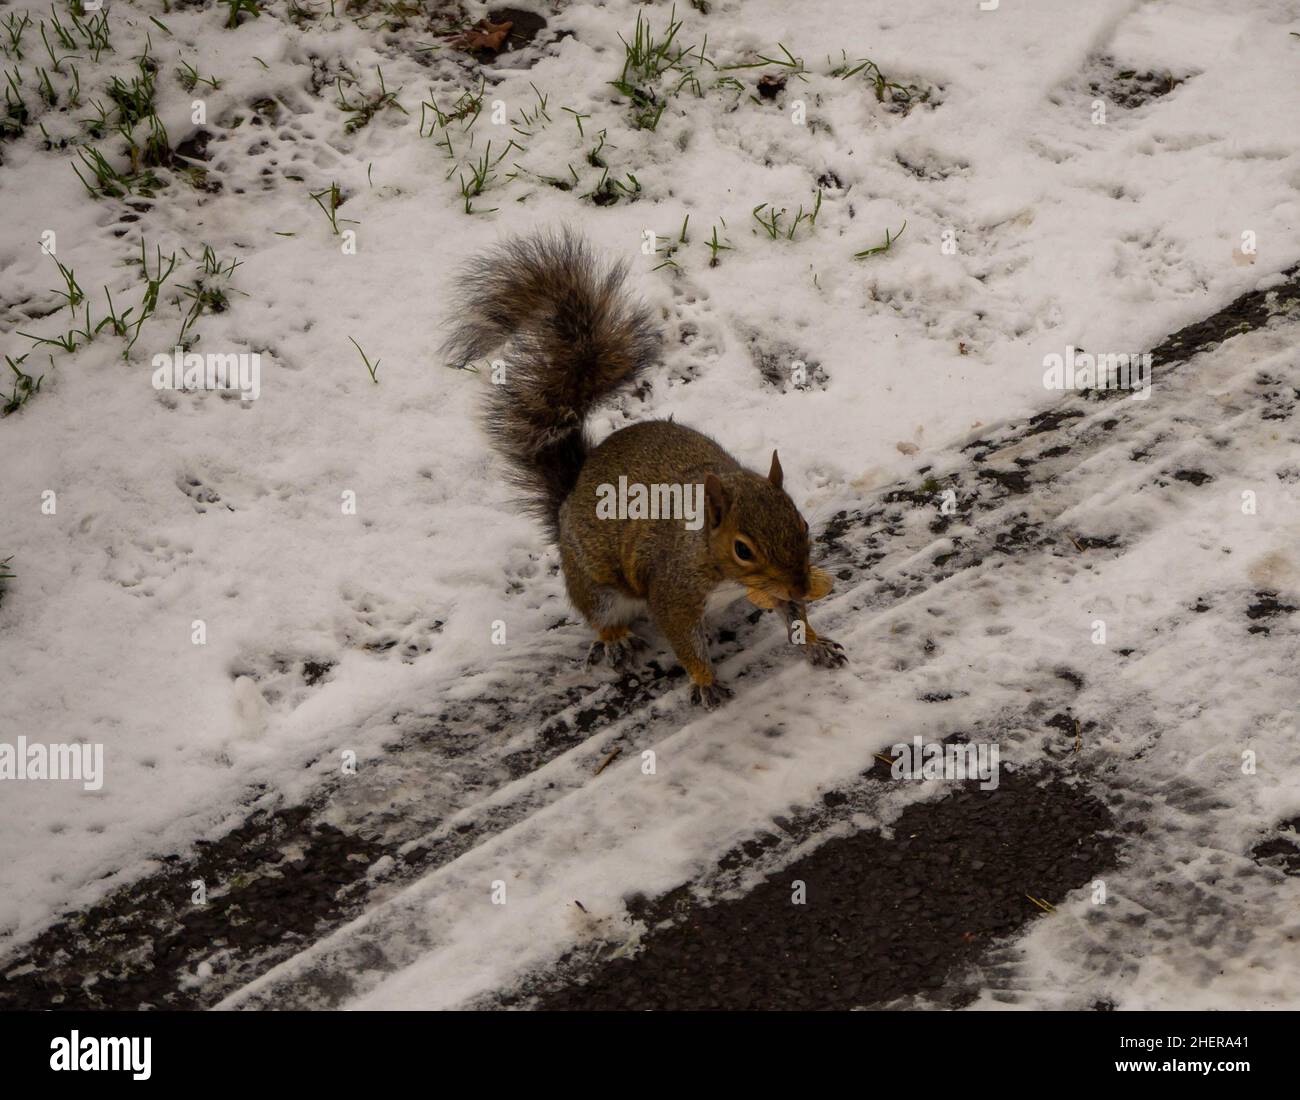 Grey squirrel on a snowy path with  peanut in its mouth Stock Photo